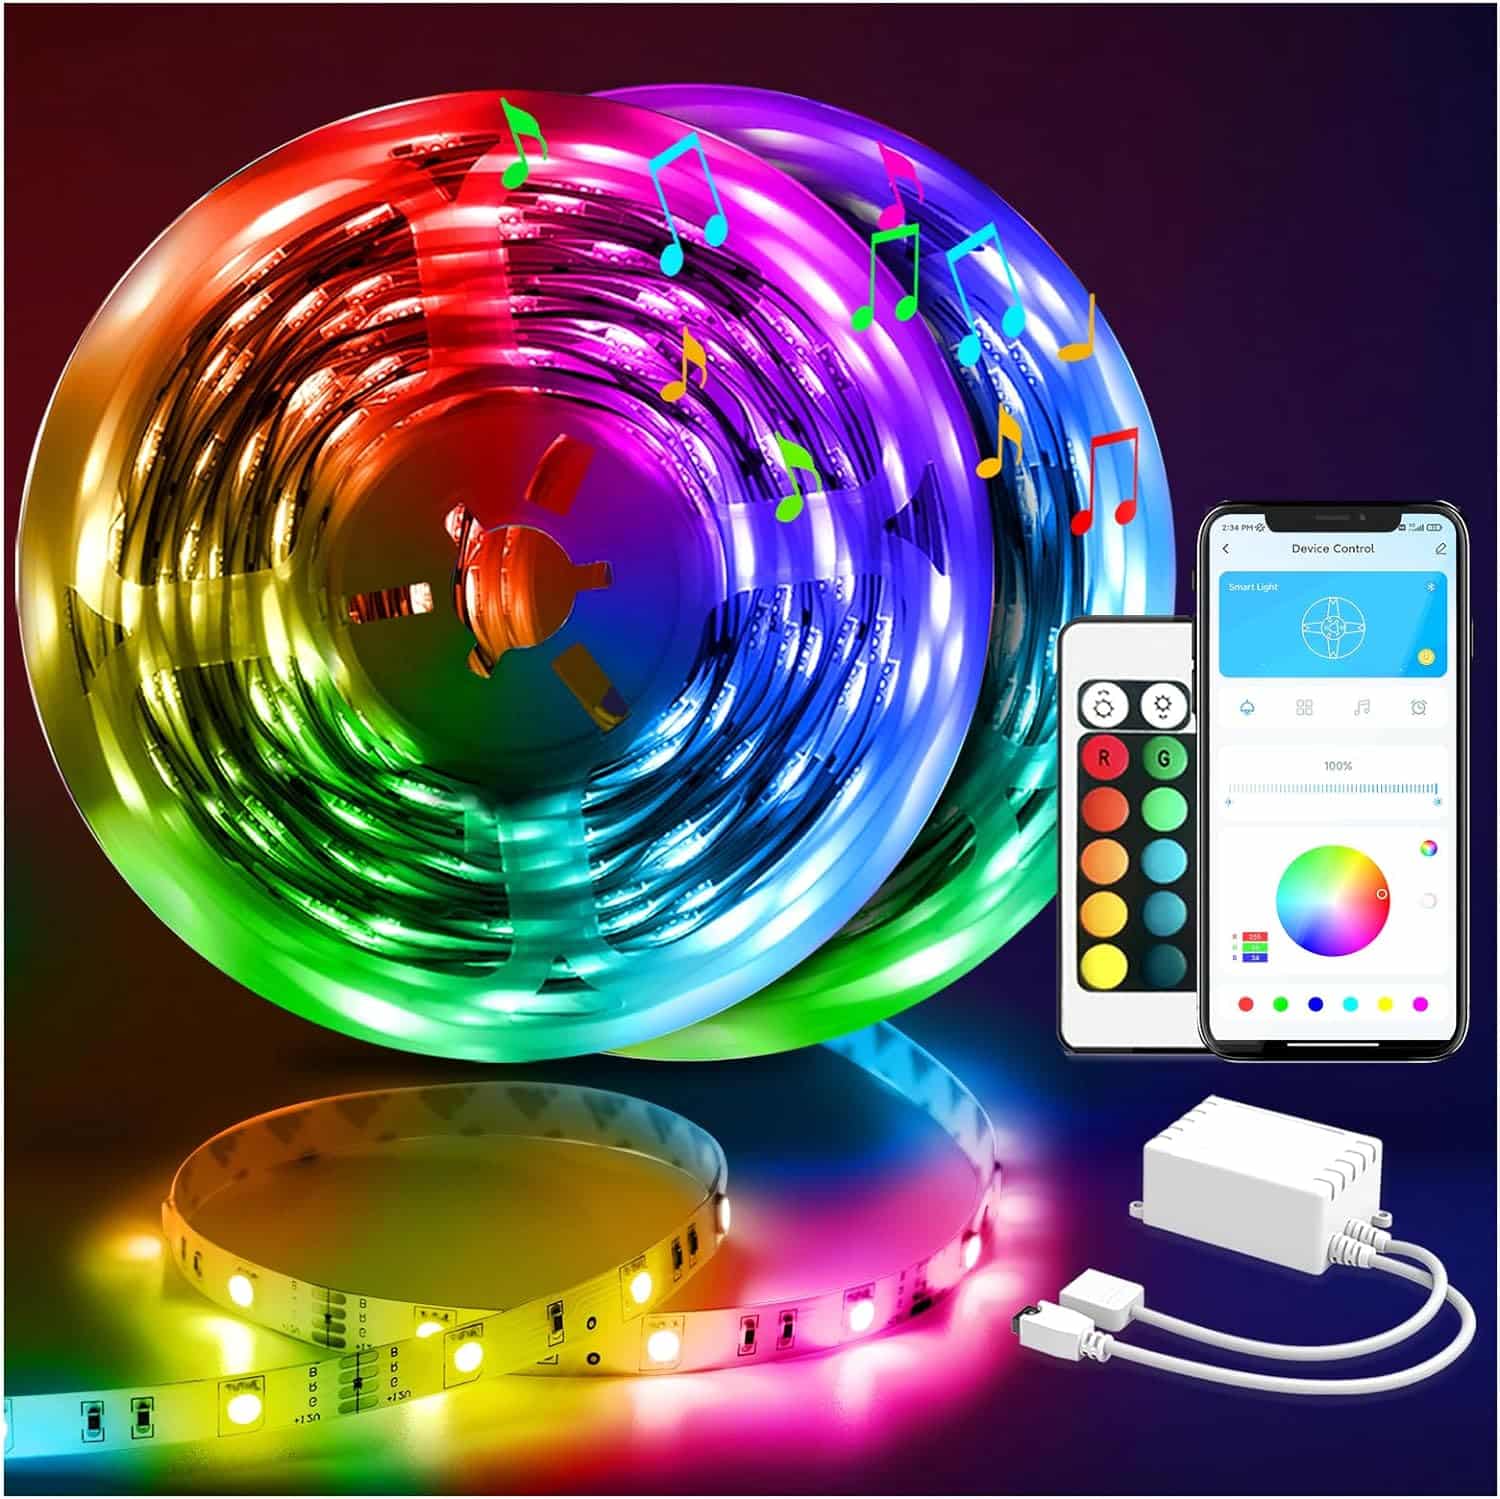 DAYBETTER Led Strip Lights 100ft Smart with App Remote Control Review